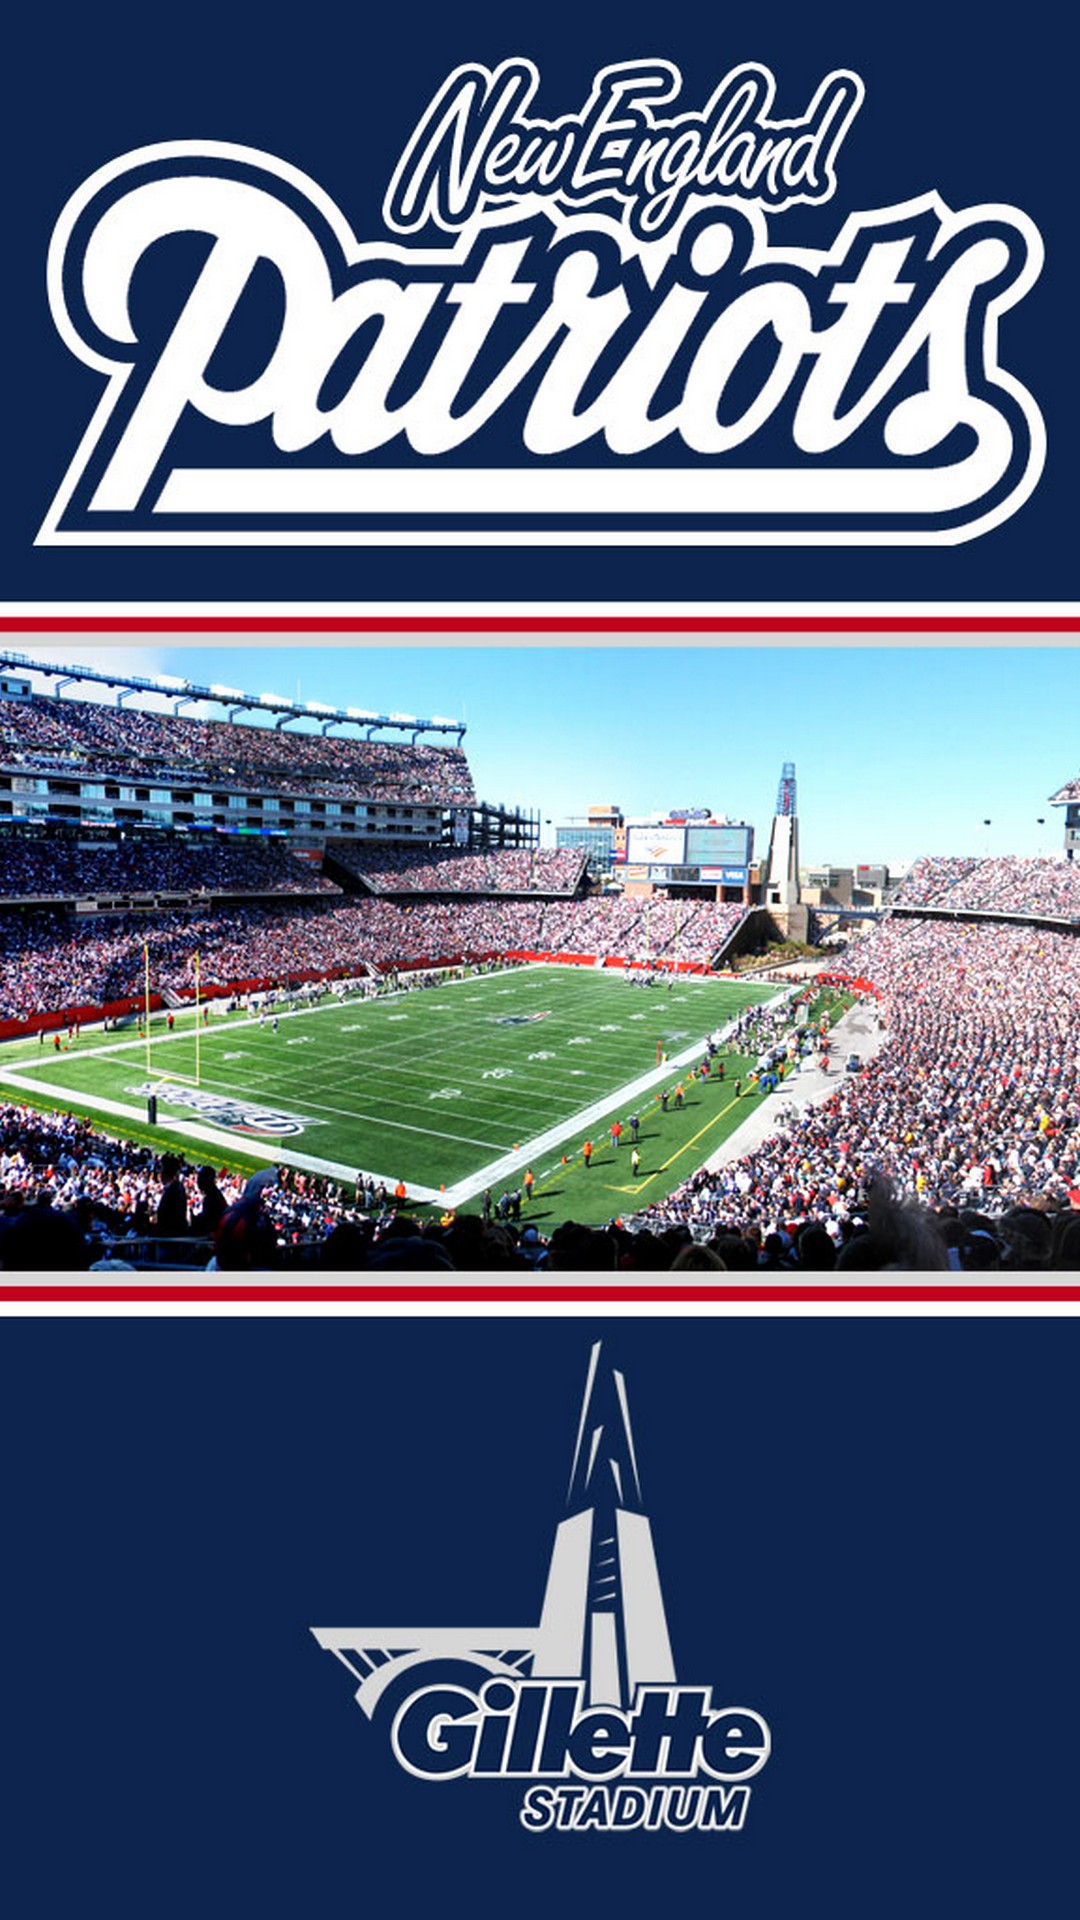 New England Patriots iPhone Wallpaper with high-resolution 1080x1920 pixel. Download and set as wallpaper for Apple iPhone X, XS Max, XR, 8, 7, 6, SE, iPad, Android